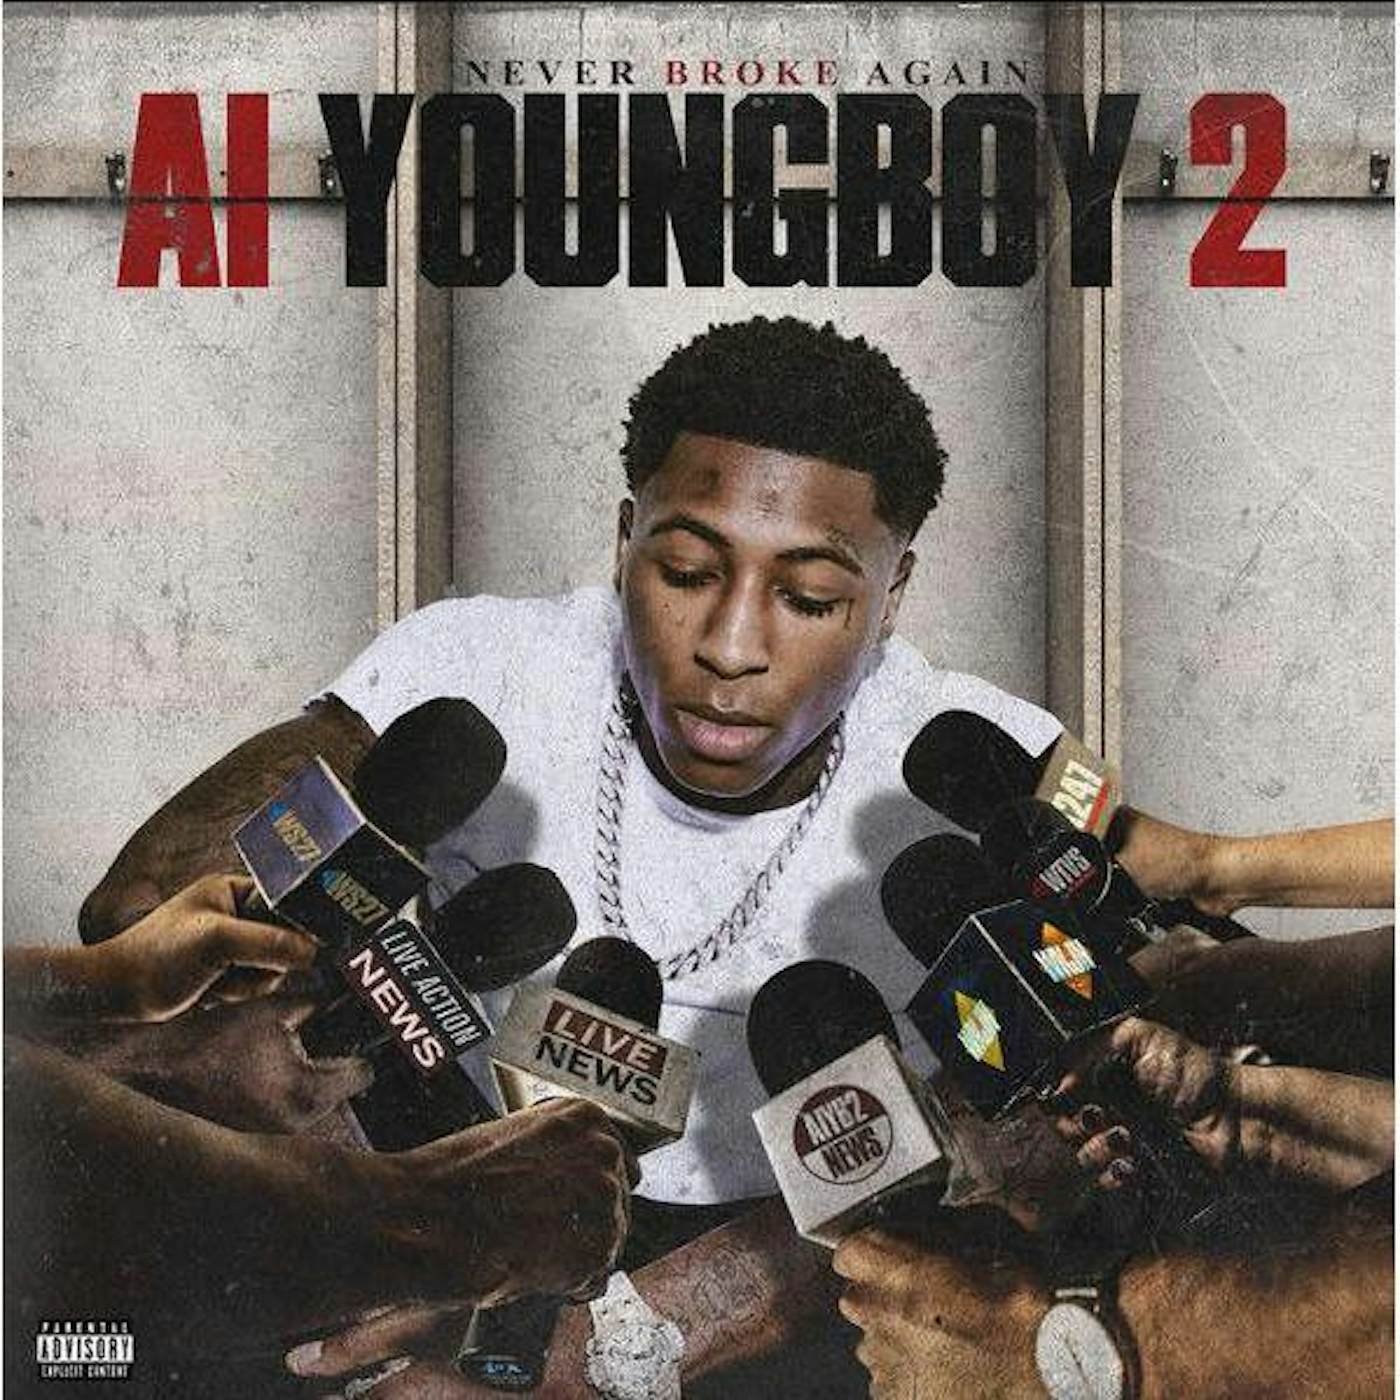 YoungBoy Never Broke Again AI YoungBoy 2 Vinyl Record